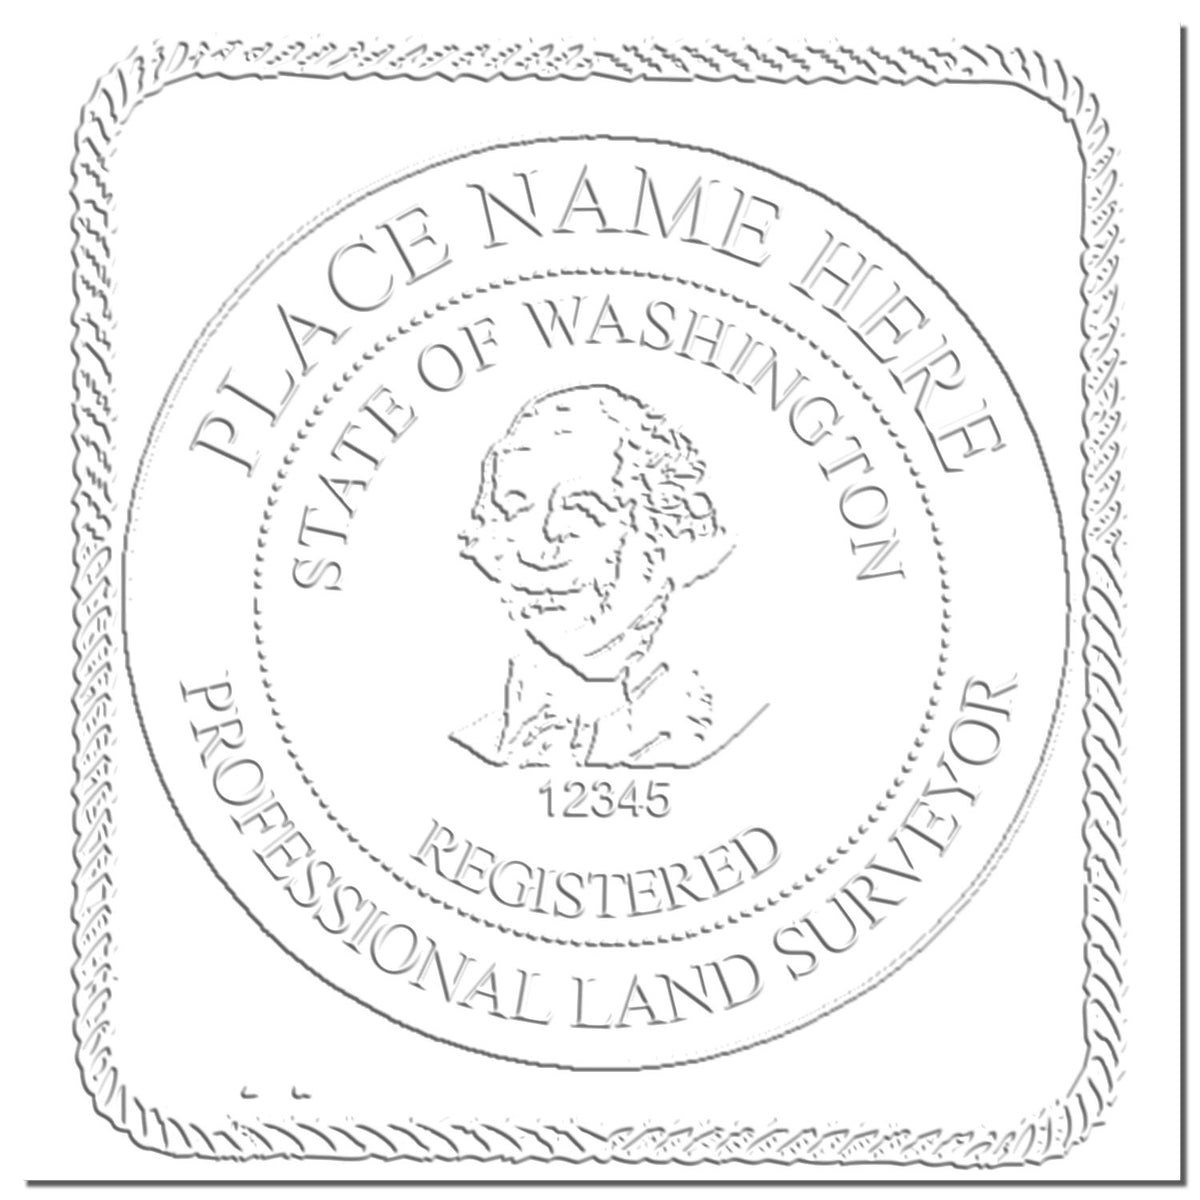 This paper is stamped with a sample imprint of the Gift Washington Land Surveyor Seal, signifying its quality and reliability.